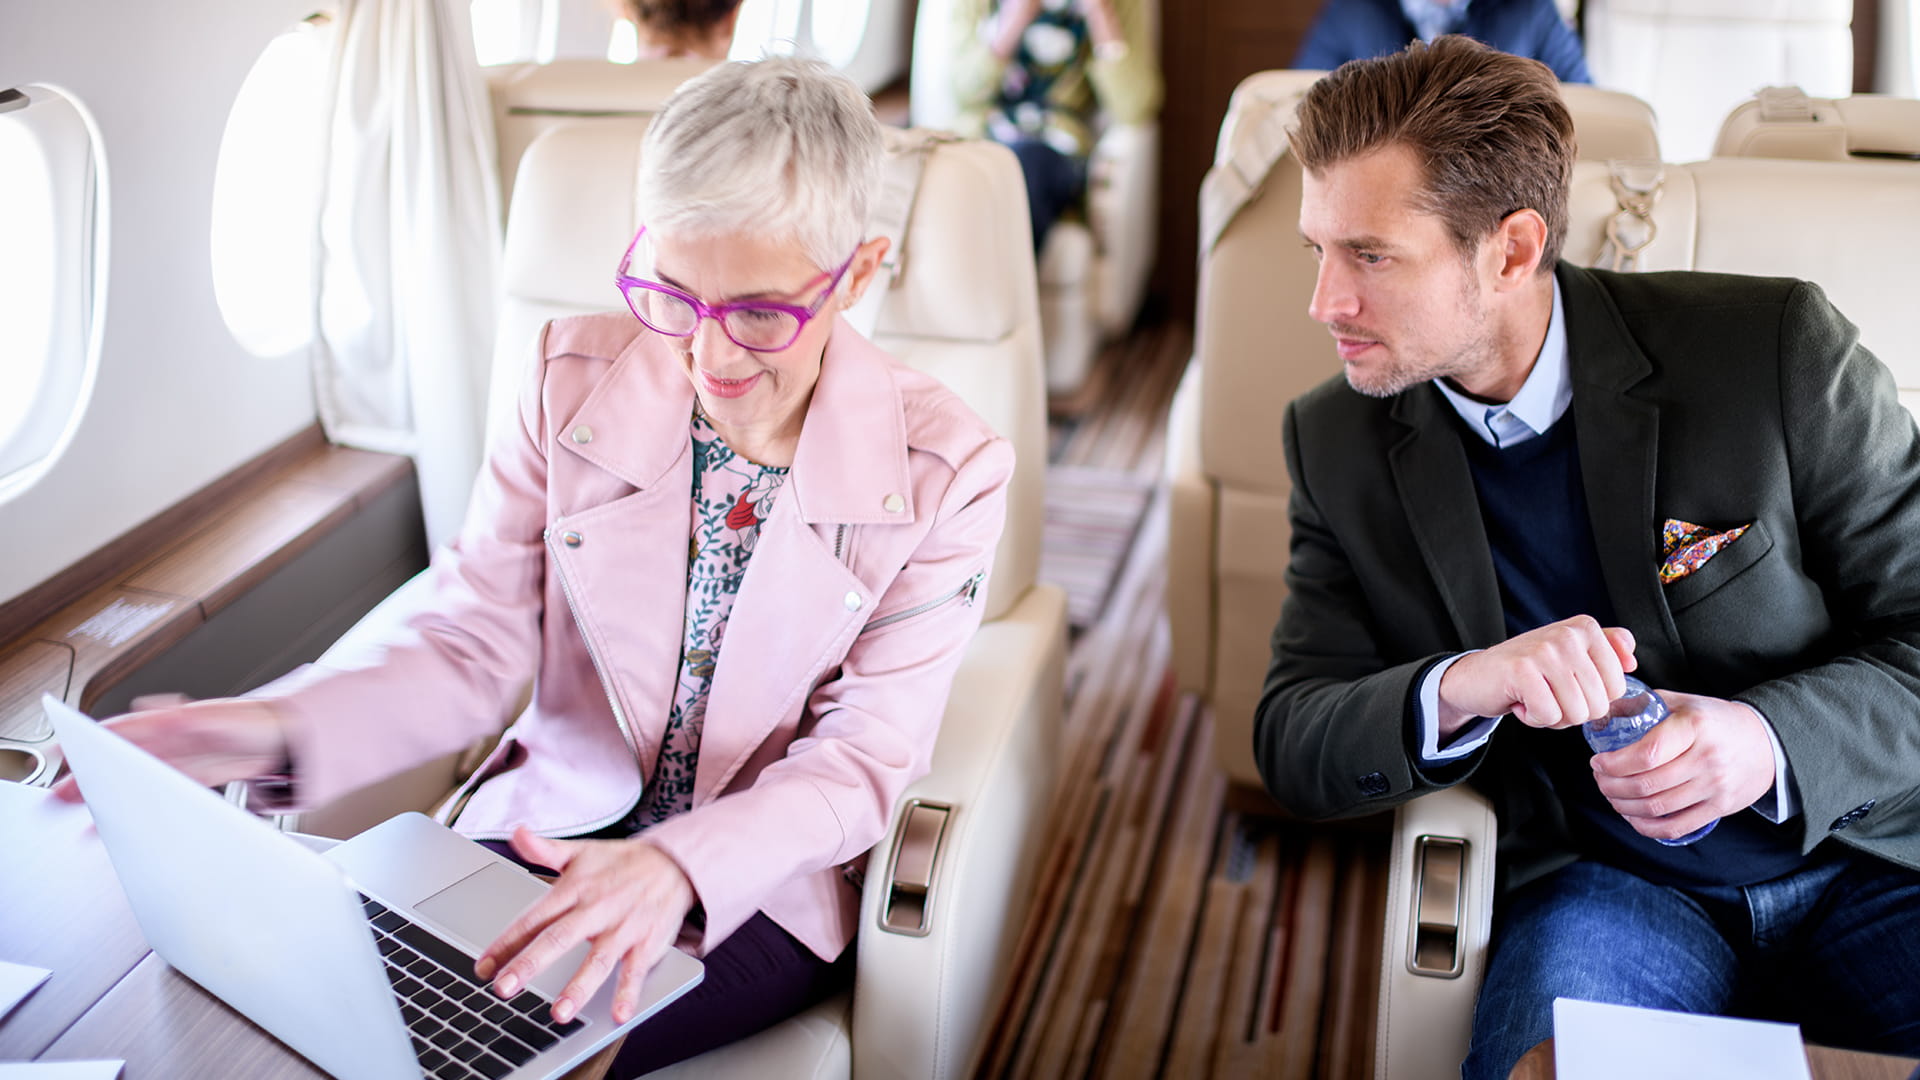 A woman operating a laptop while a man looks on. They are passengers on a private jet.